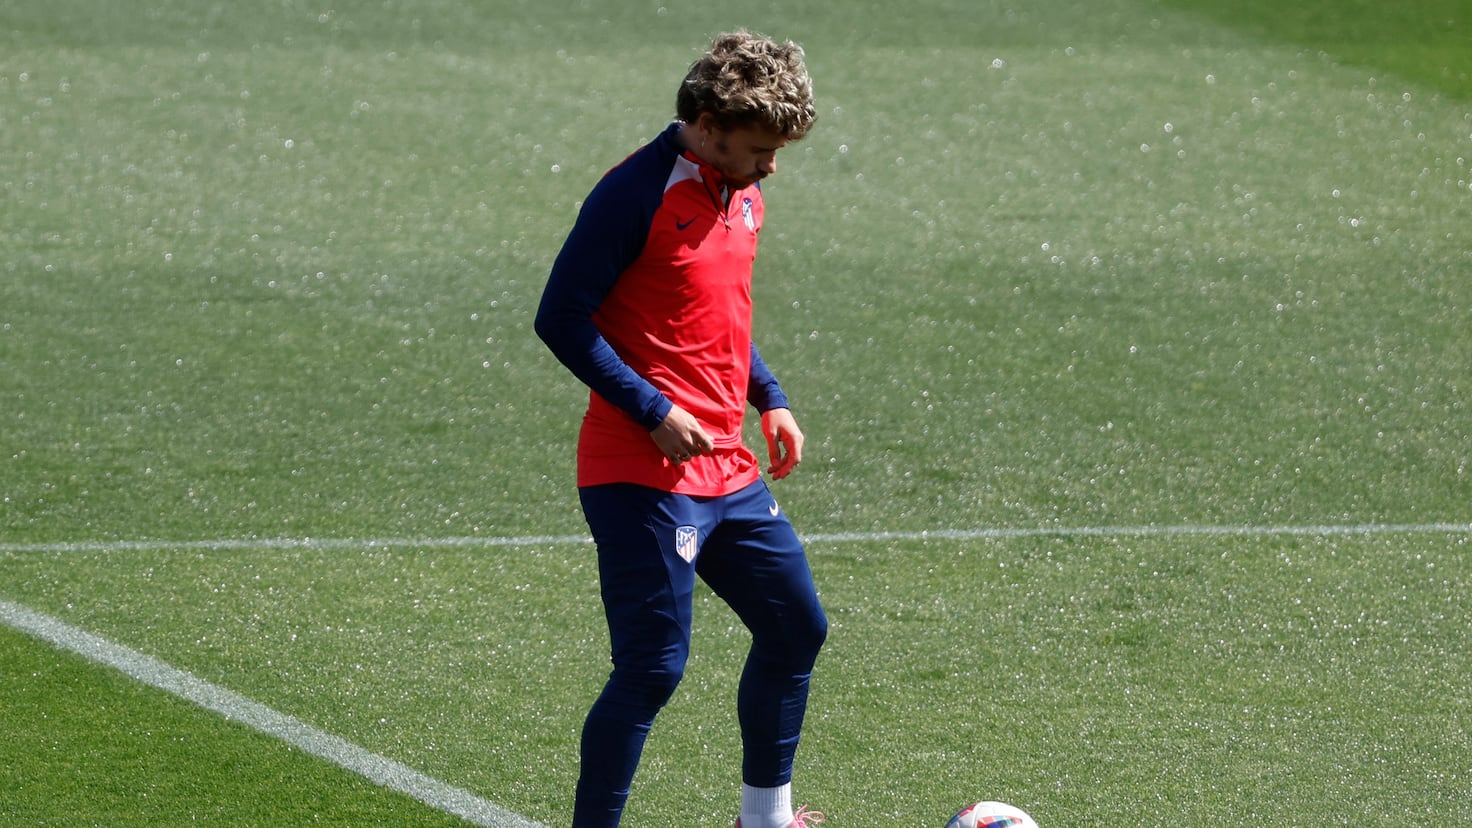 Atletico's Star Griezmann Returns to Training with a Bang